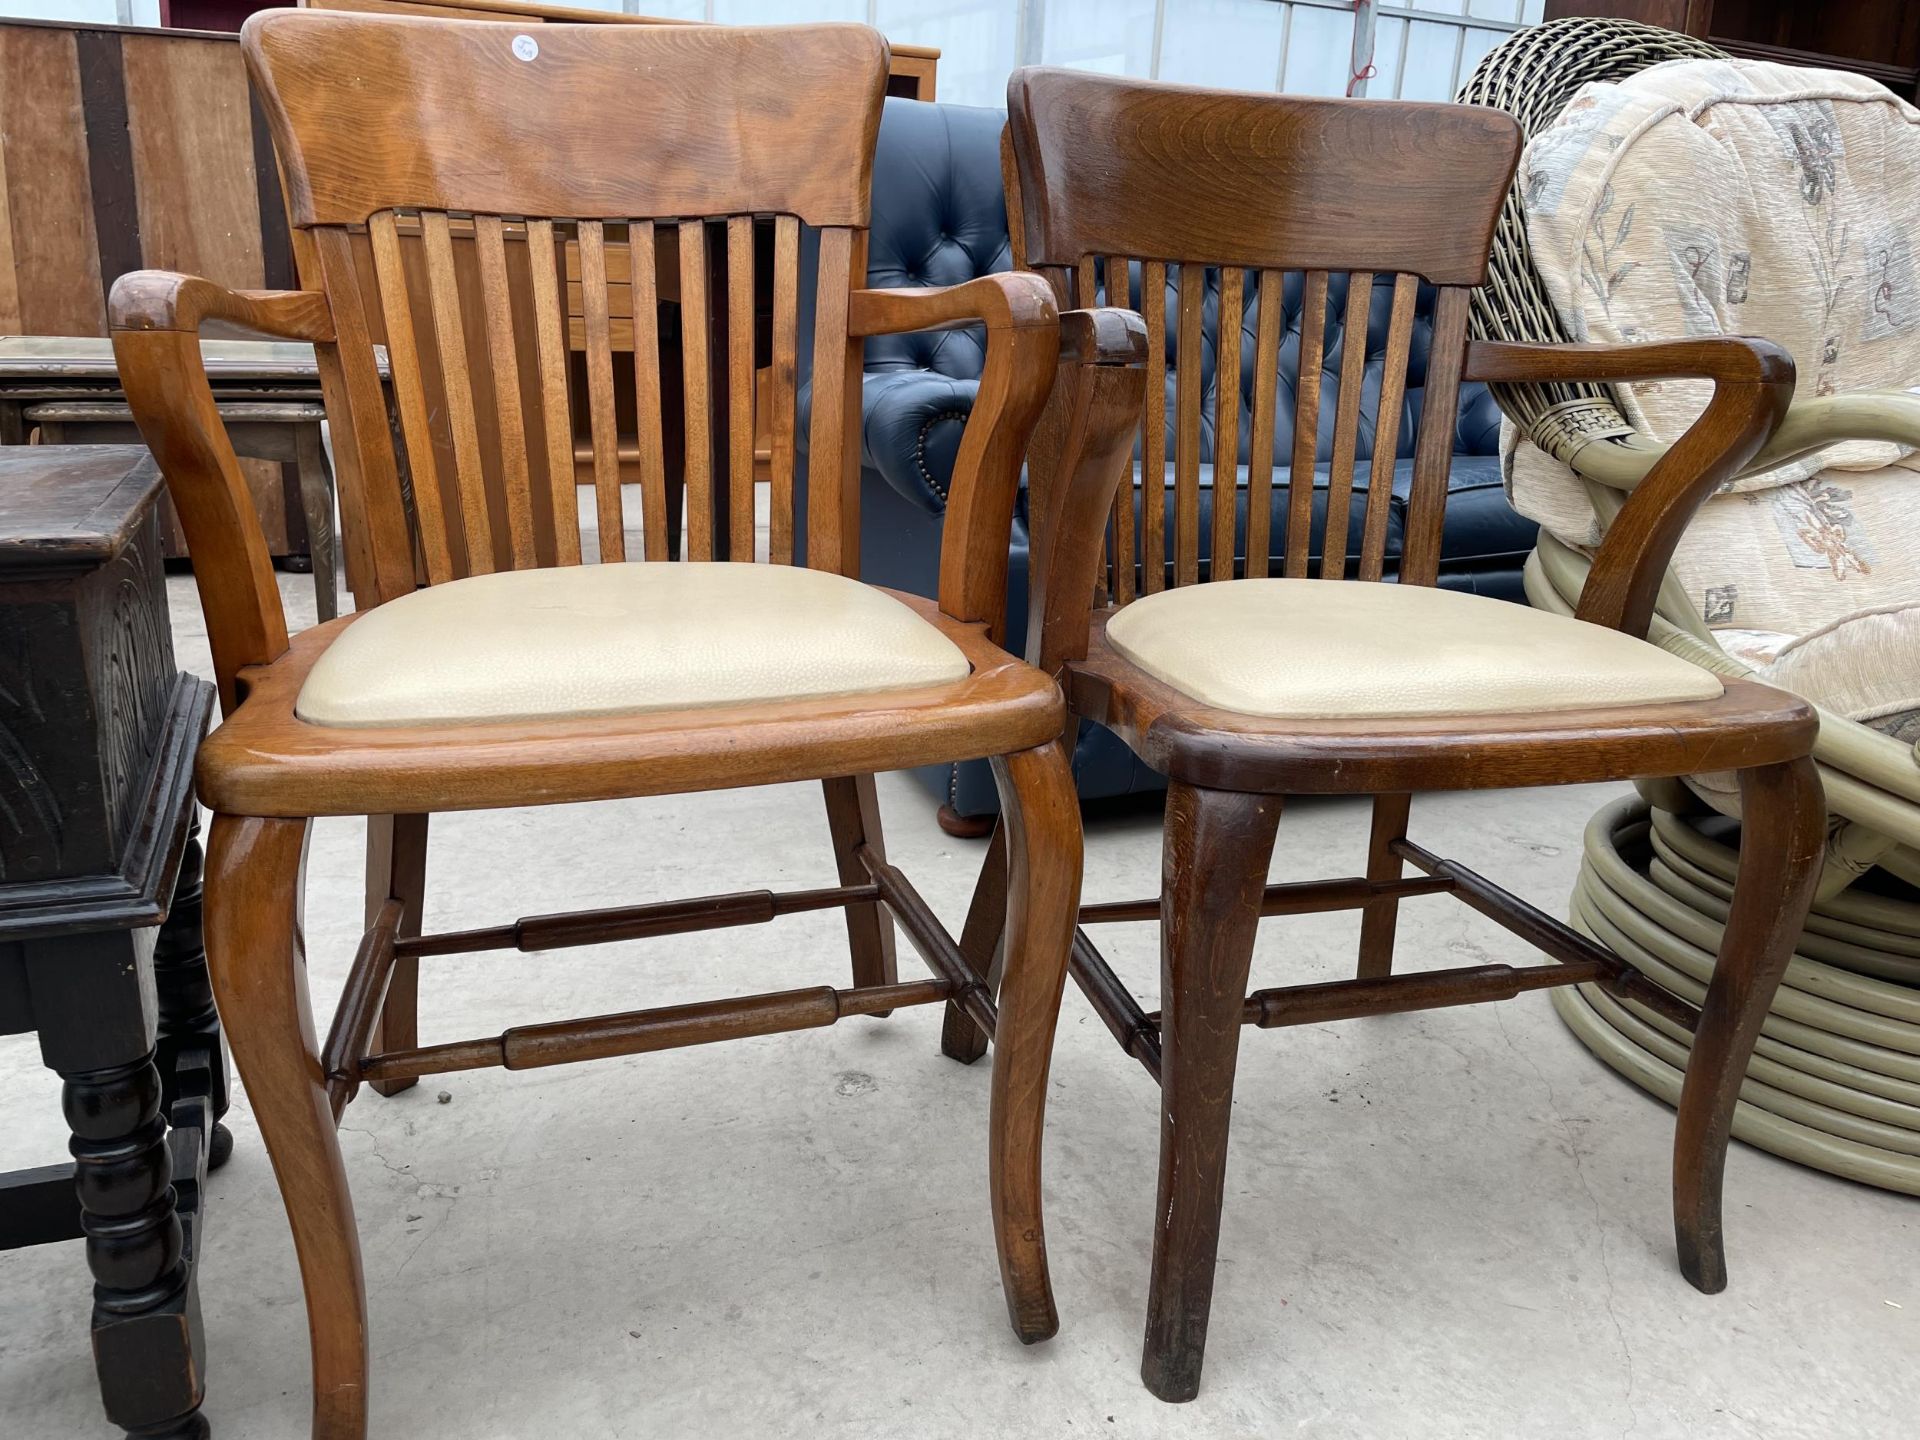 TWO EARLY 20TH CENTURY OAK AND BEECH OFFICE ELBOW CHAIRS - Image 2 of 4